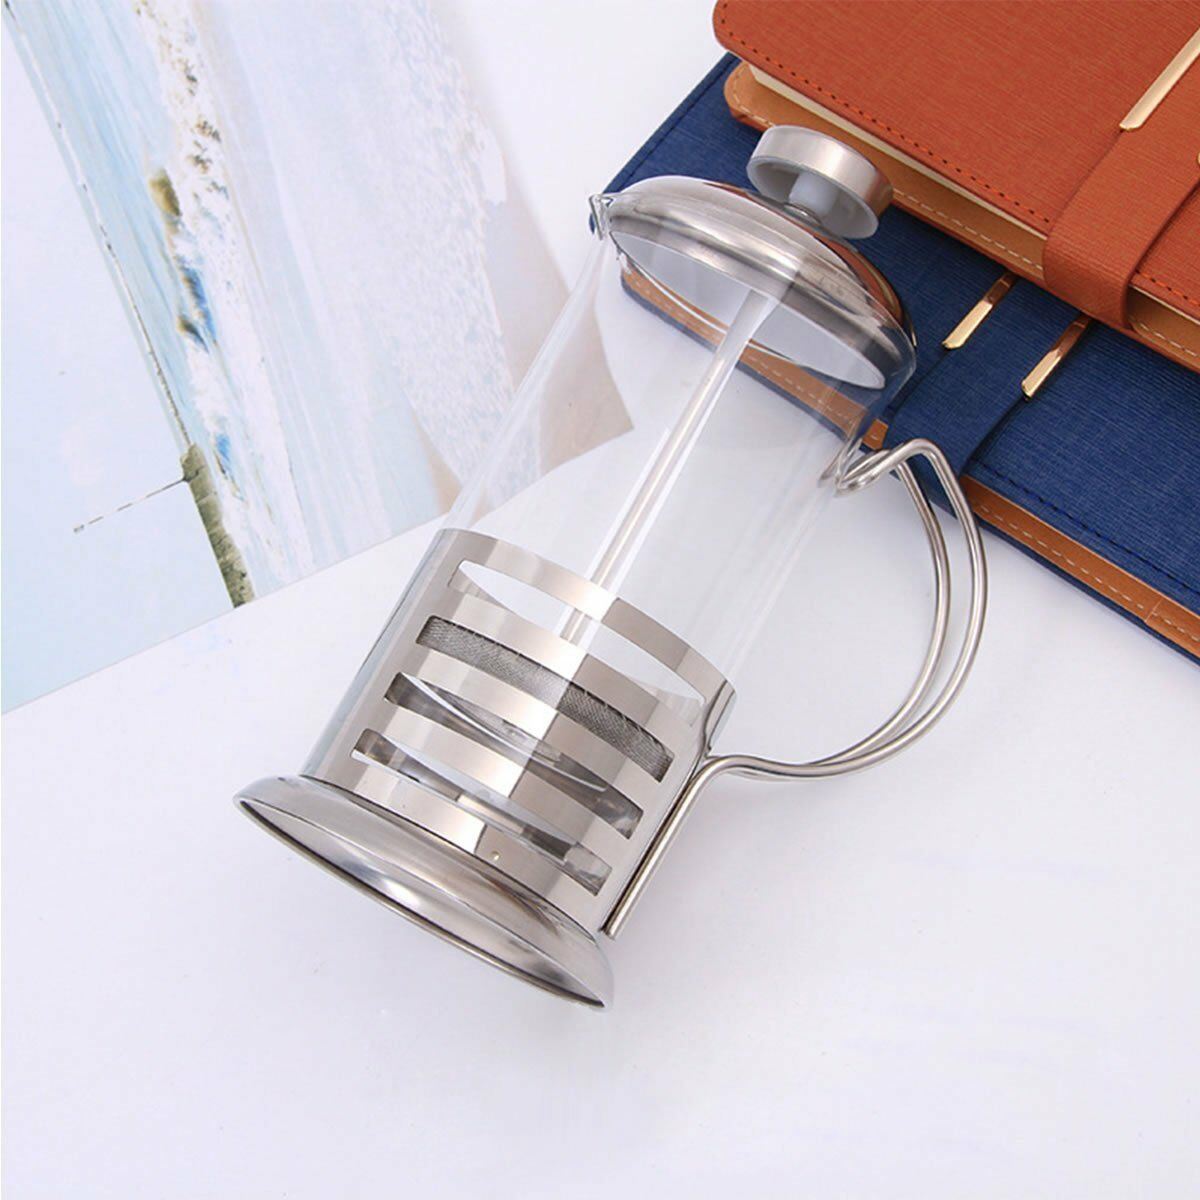 3 Cup Cafetiere, 350ml by Geezy - UKBuyZone